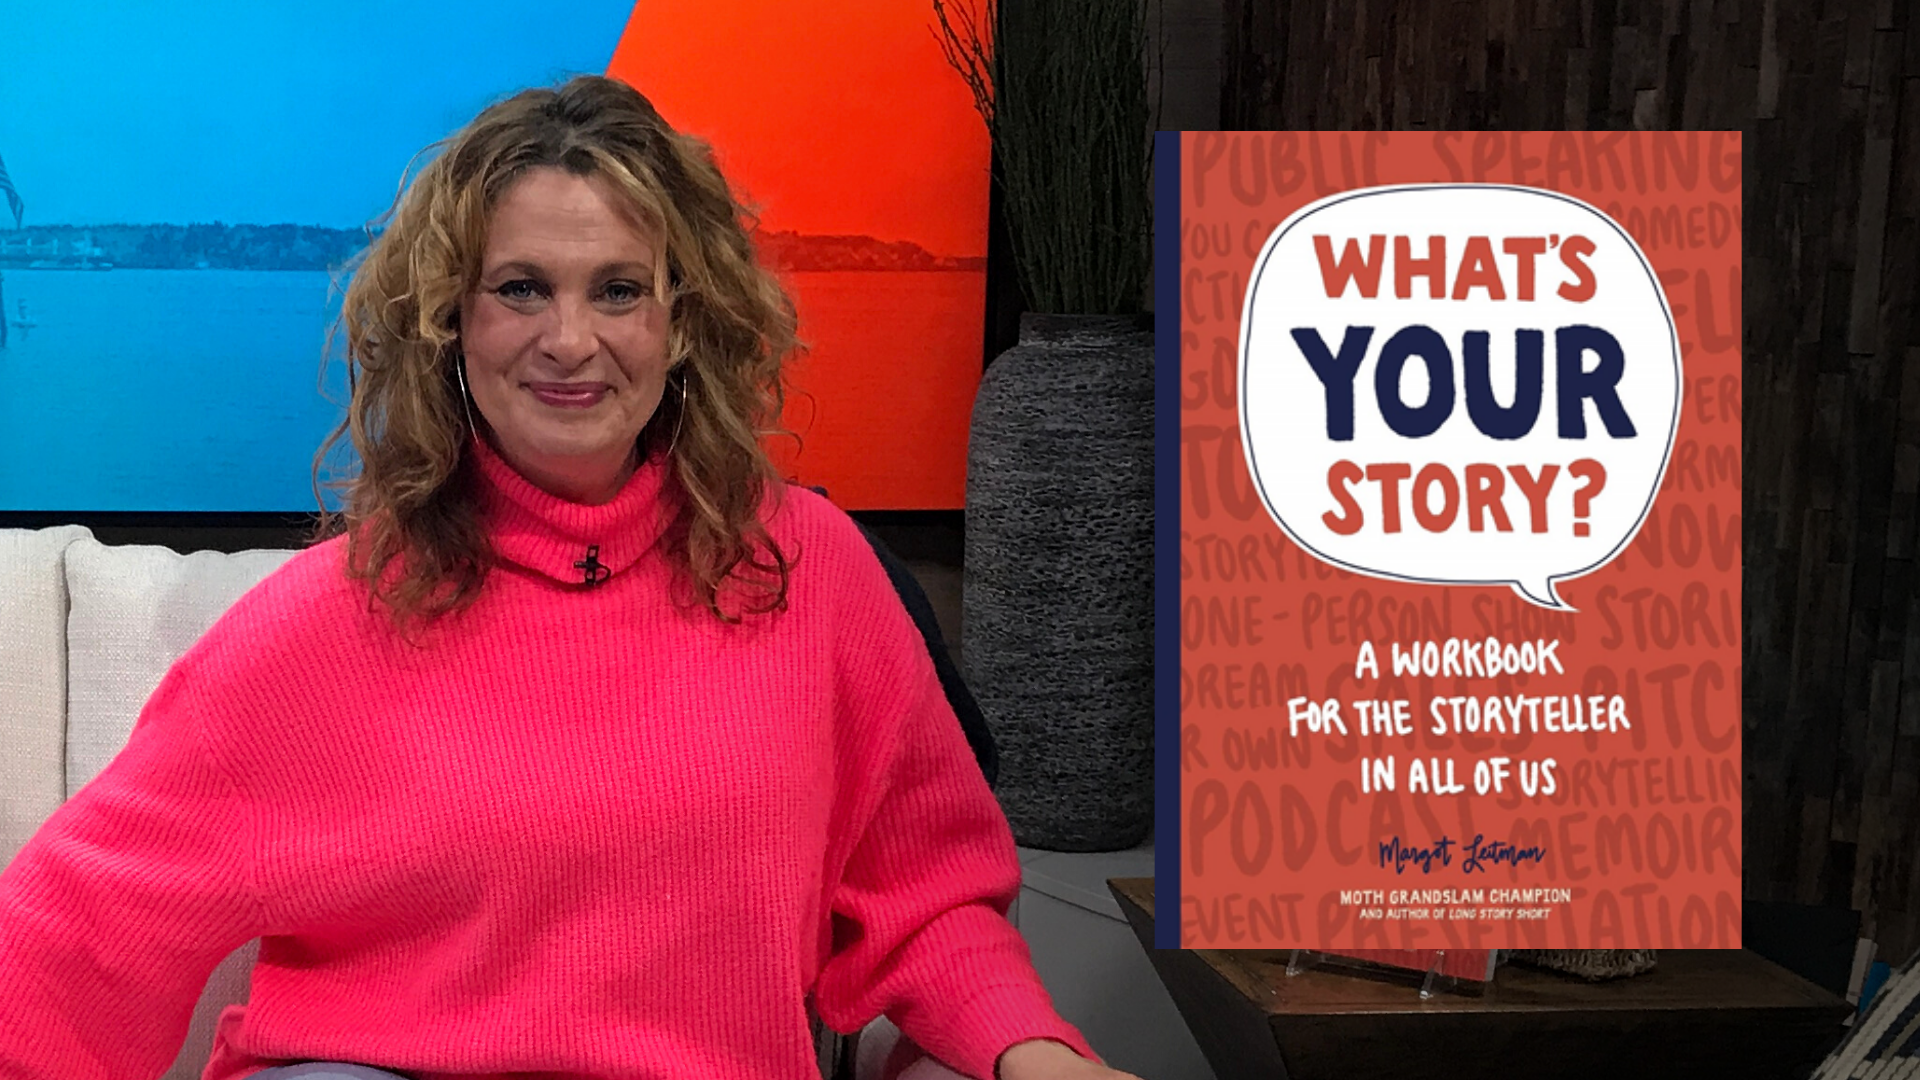 Margot Leitman's new workbook "What's Your Story?" helps everyday people craft their stories.